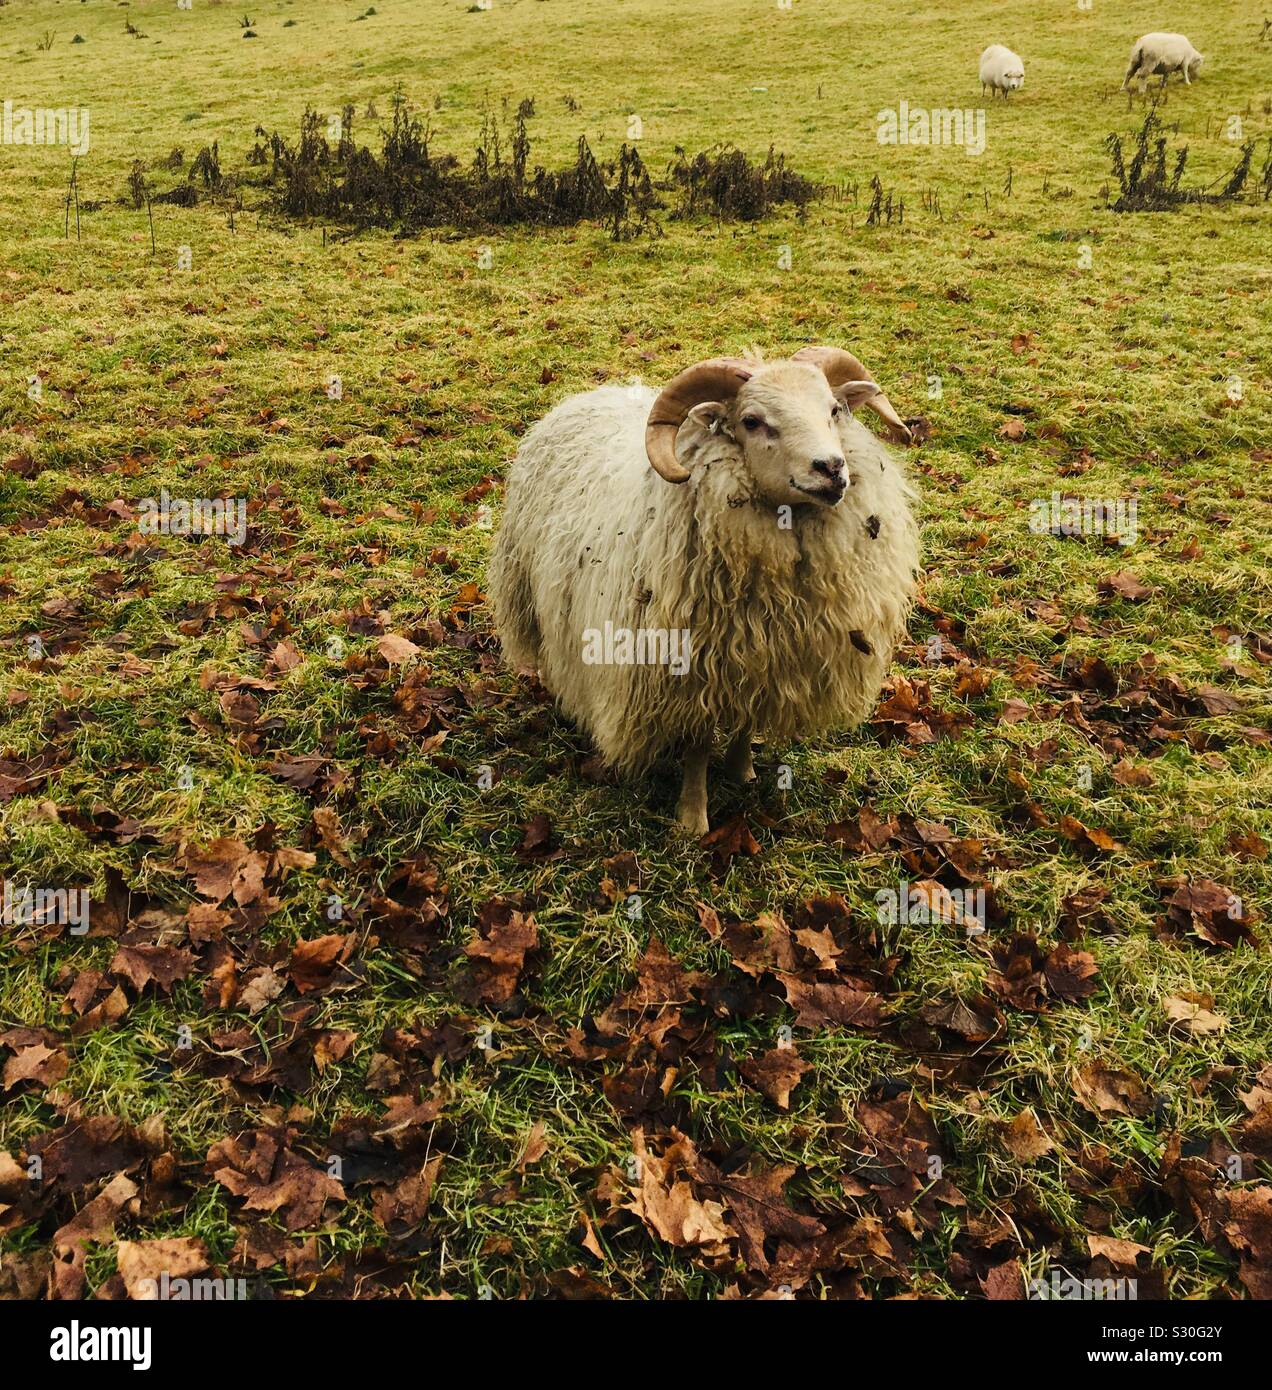 Long haired horned sheep Stock Photo